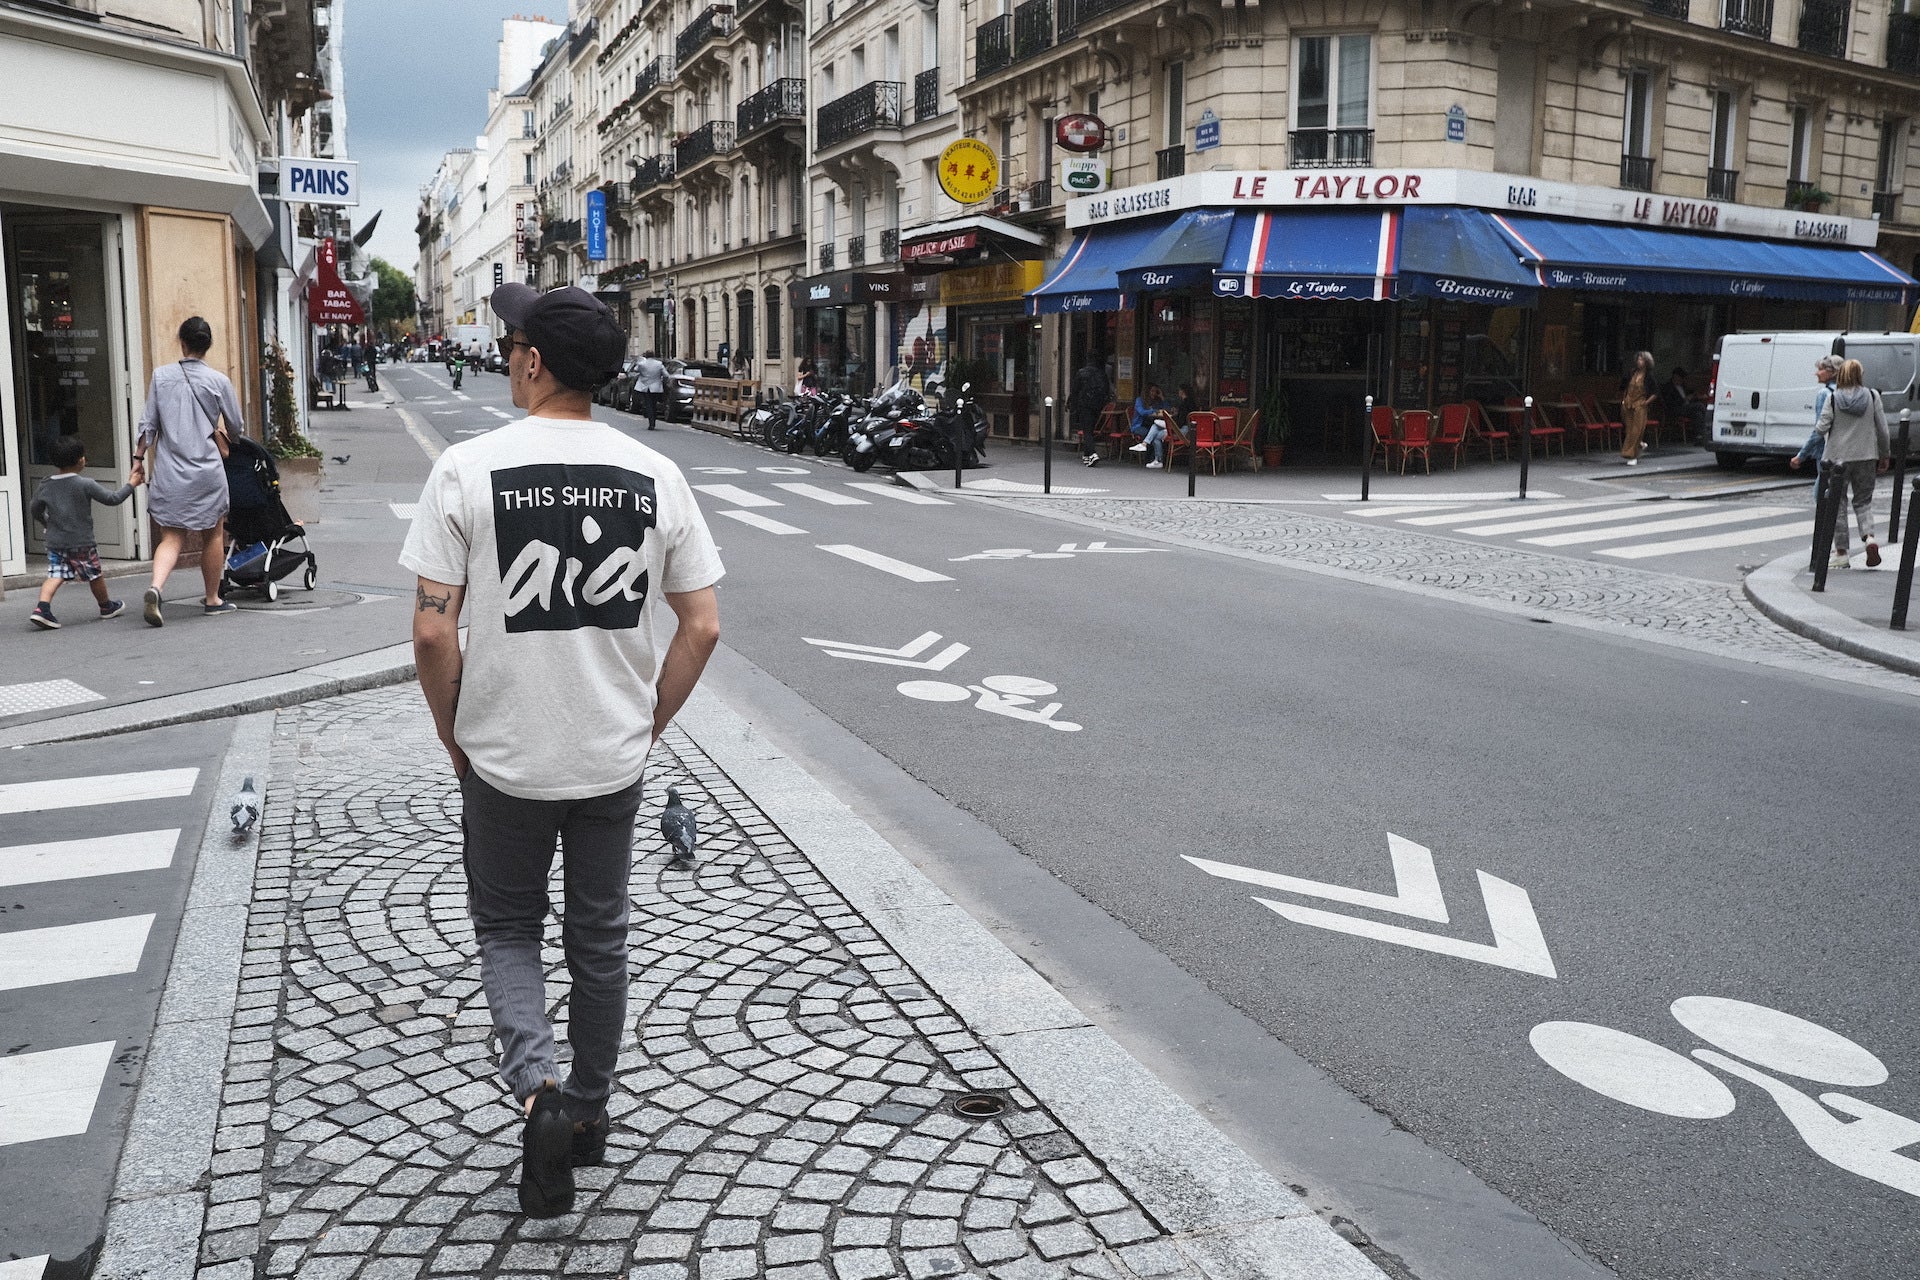 A person walking on an urban street, wearing a shirt that says "this shirt is aid" on the back